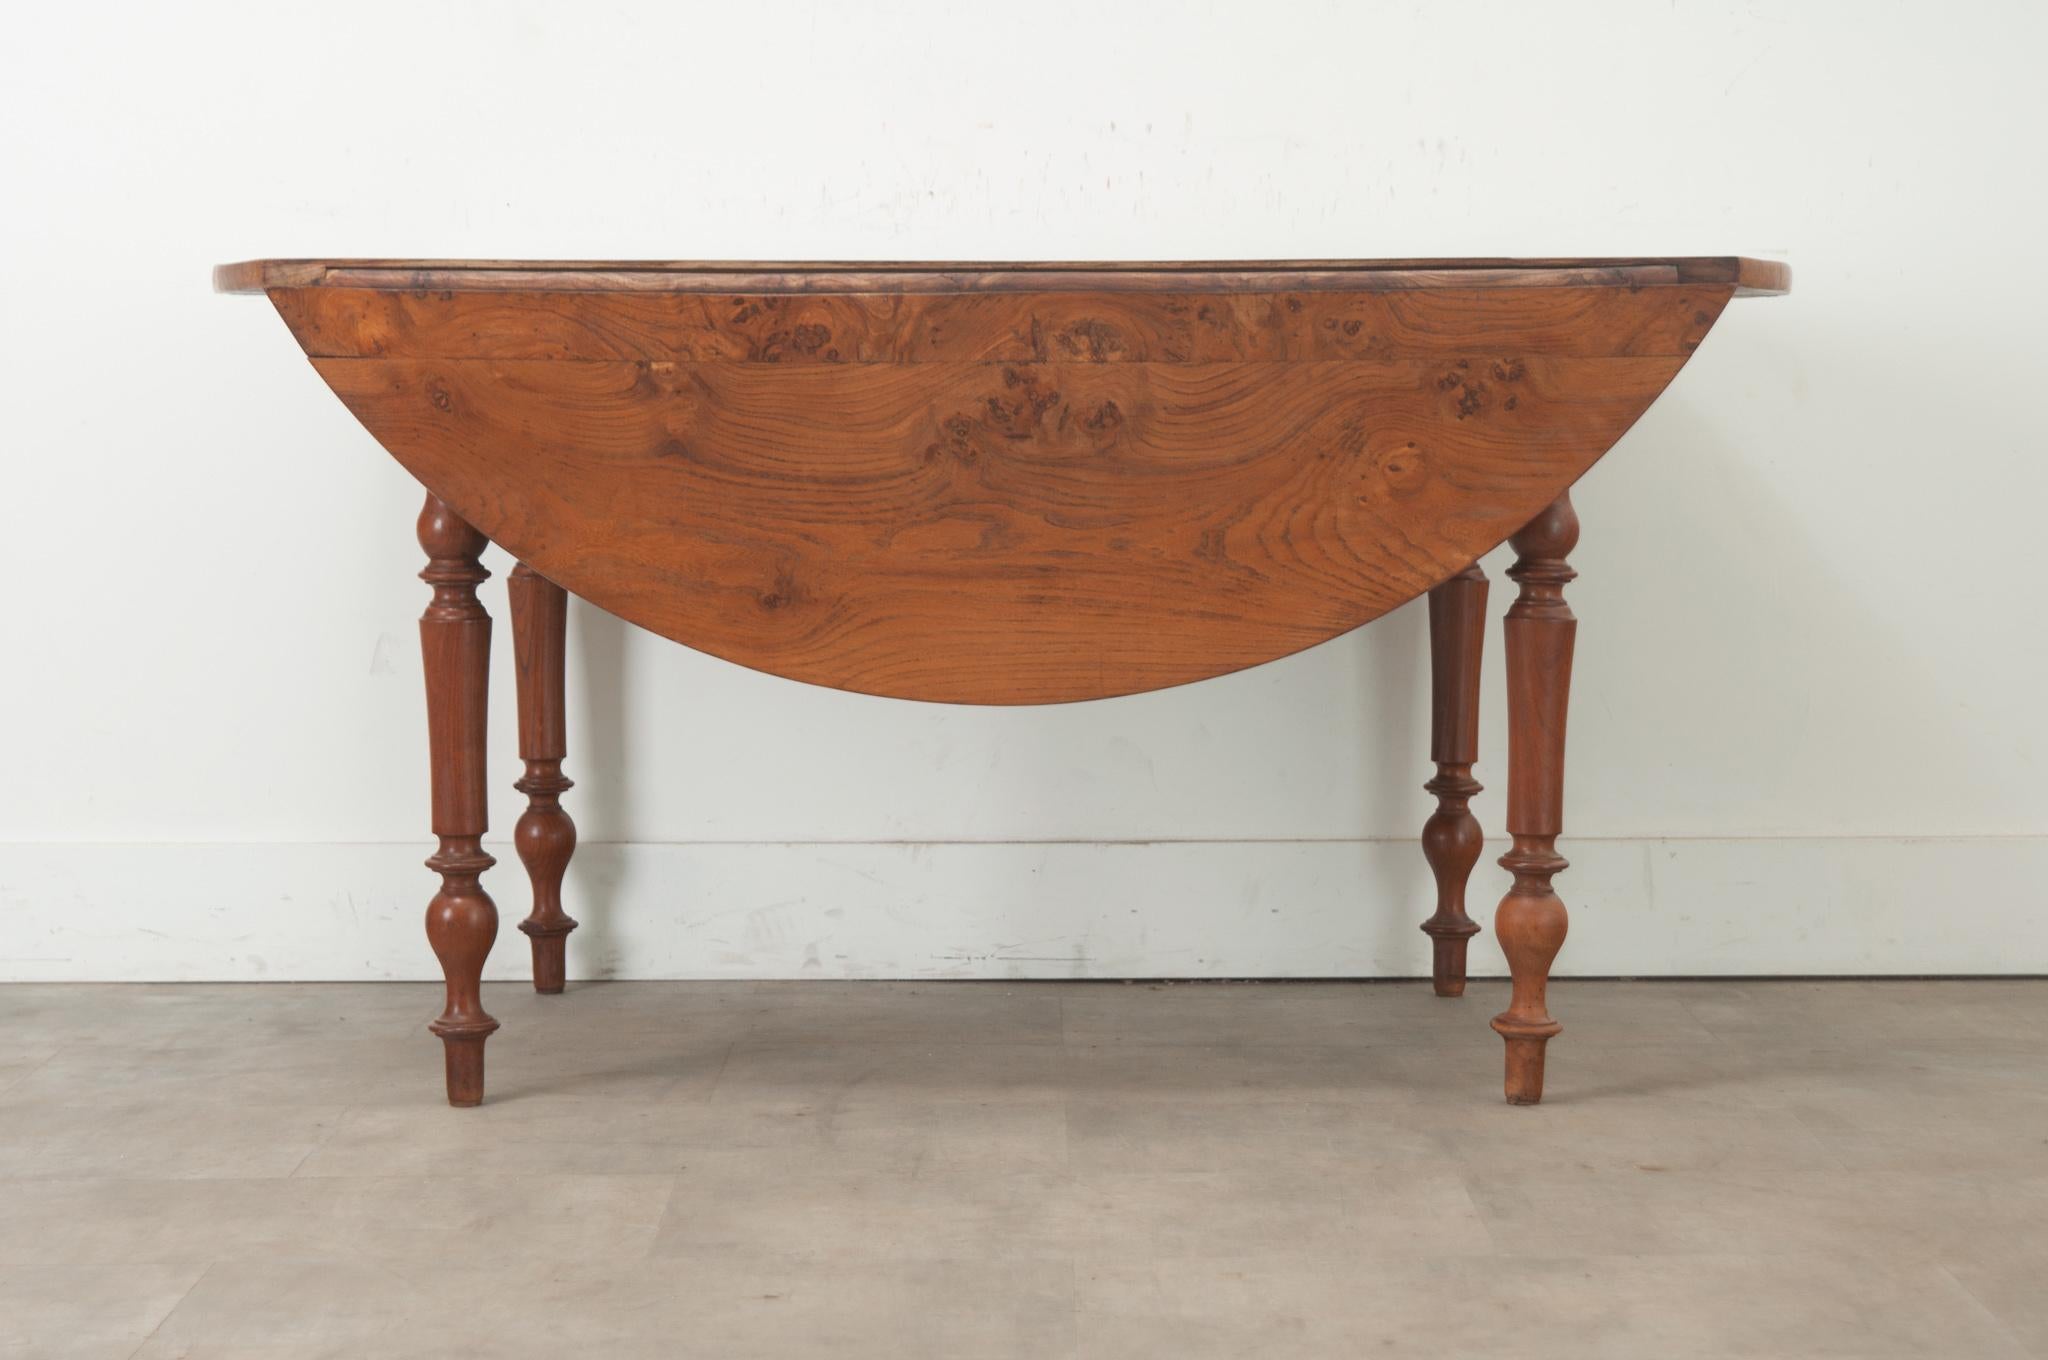 This versatile French drop leaf table is made of burl fruitwood and can be used as a console or a dining table. The top sits over four turned legs which add character to this classic dining table. The drop leaves are supported with slides that are